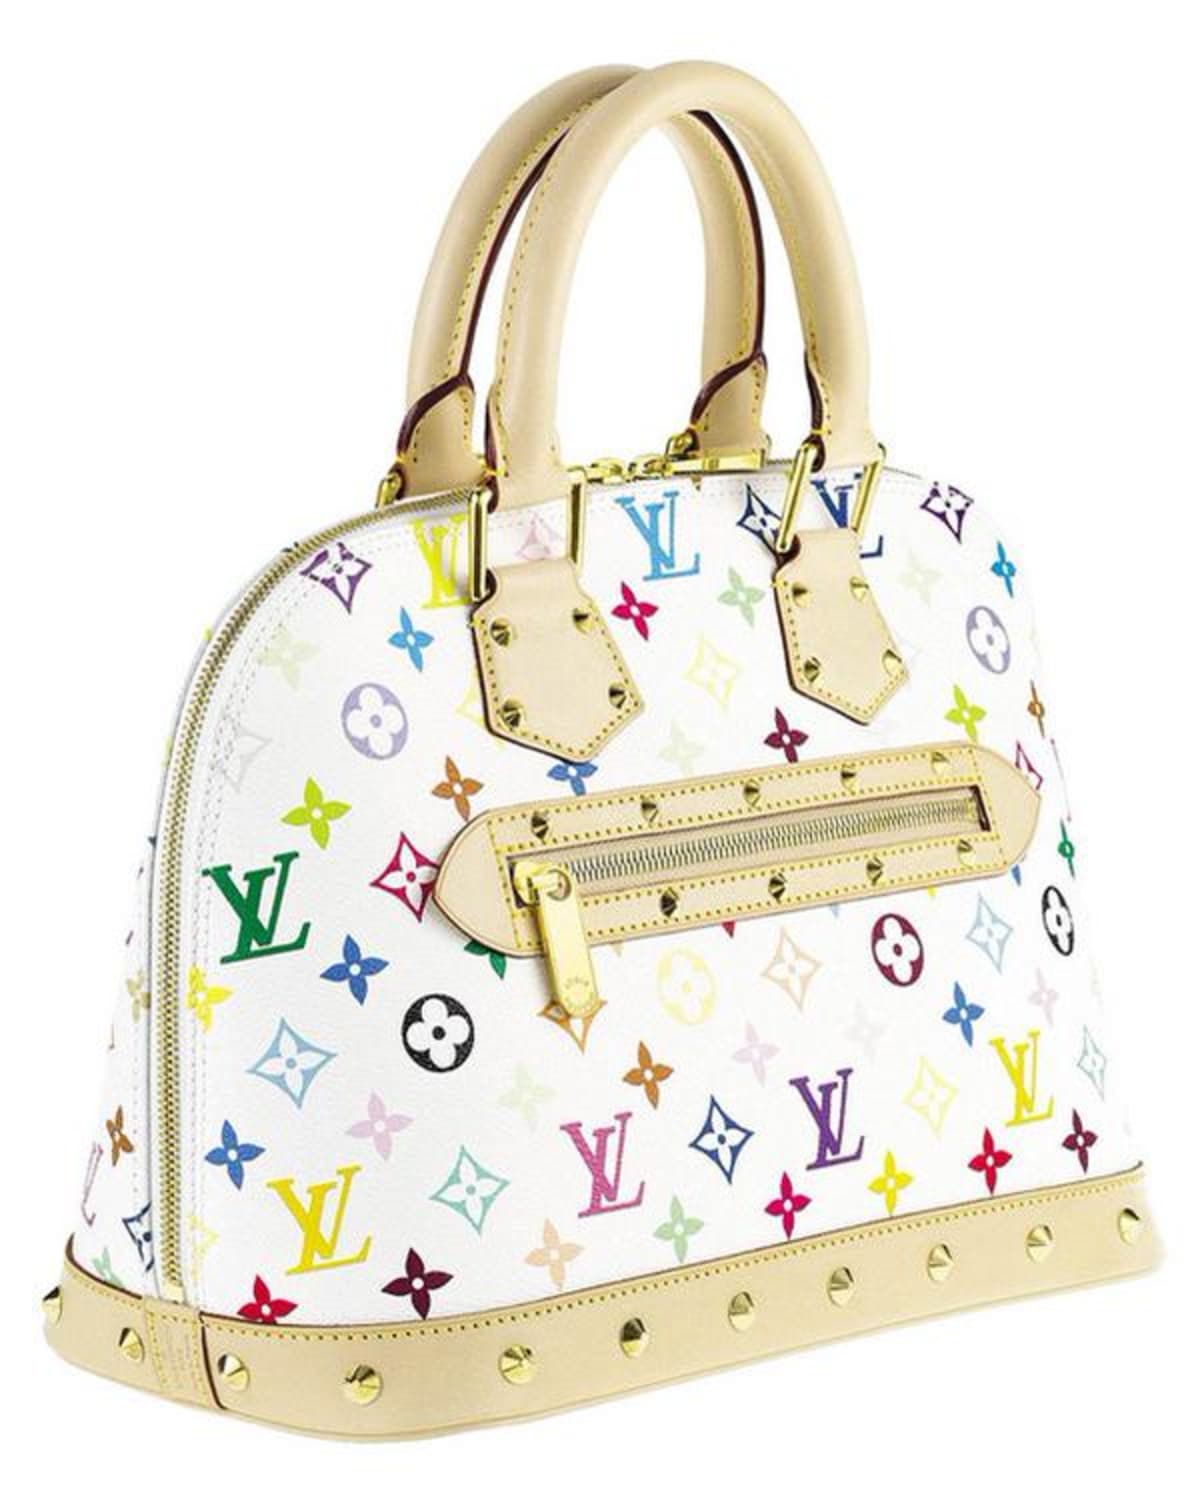 Louis Vuitton Discontinues Its Takashi Murakami Collection | Complex